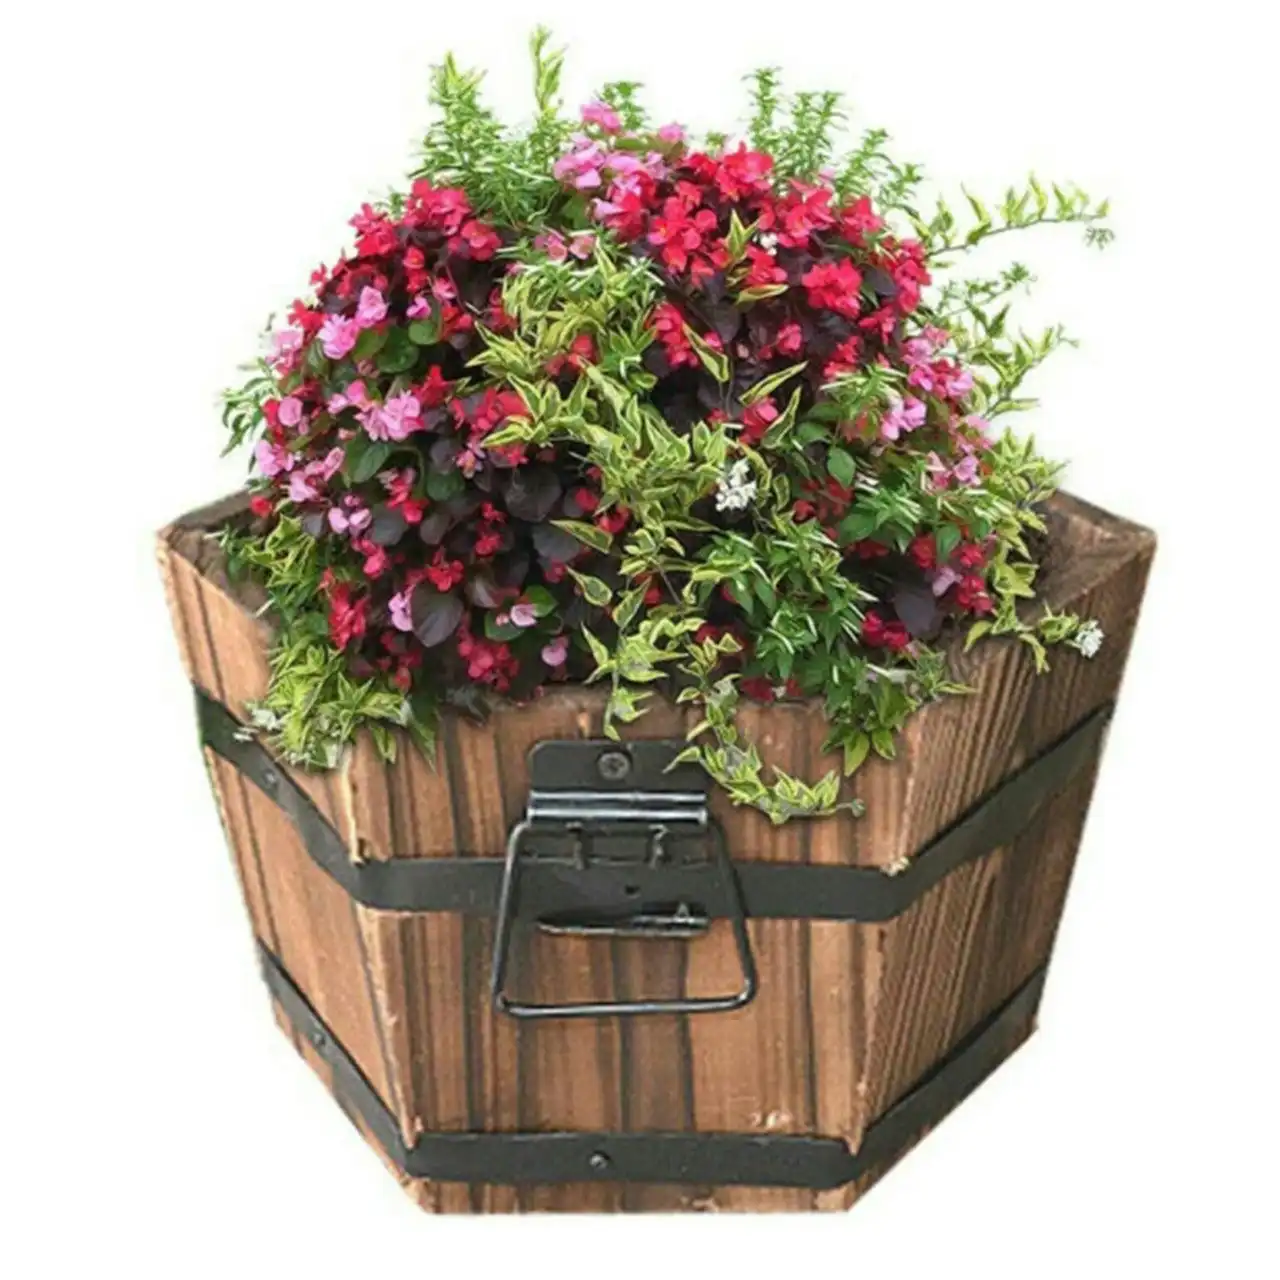 100% Solid Wood Rustic Planter Flower Pot Tub, 3 sizes